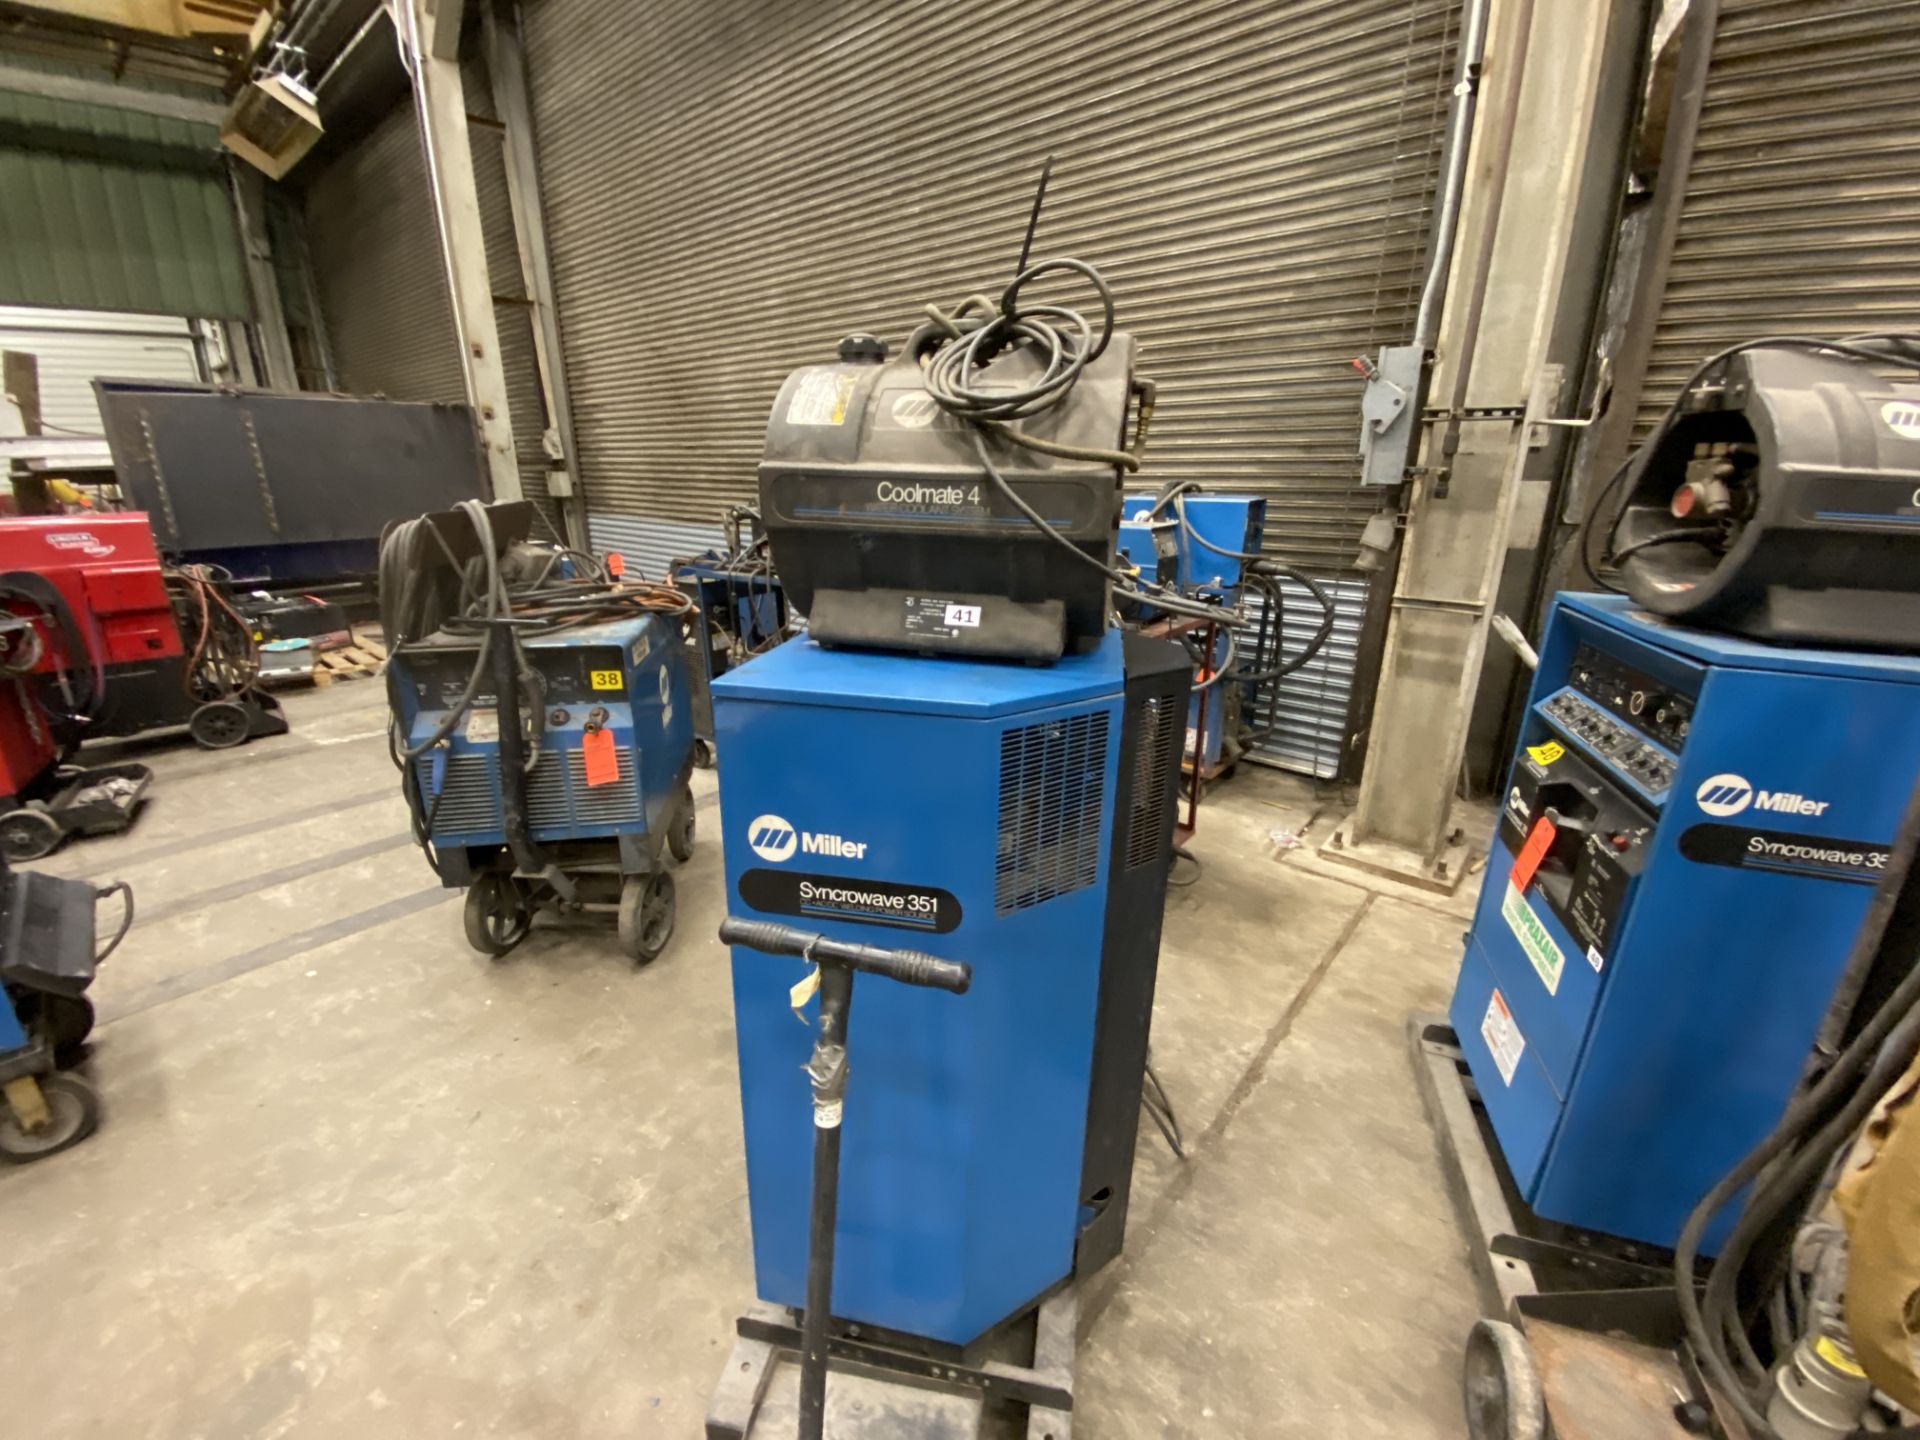 Miller synchrowave 351 CC ac/DC arc welder SN KH316086 with Coolmate 4 water chiller with foot - Image 2 of 4